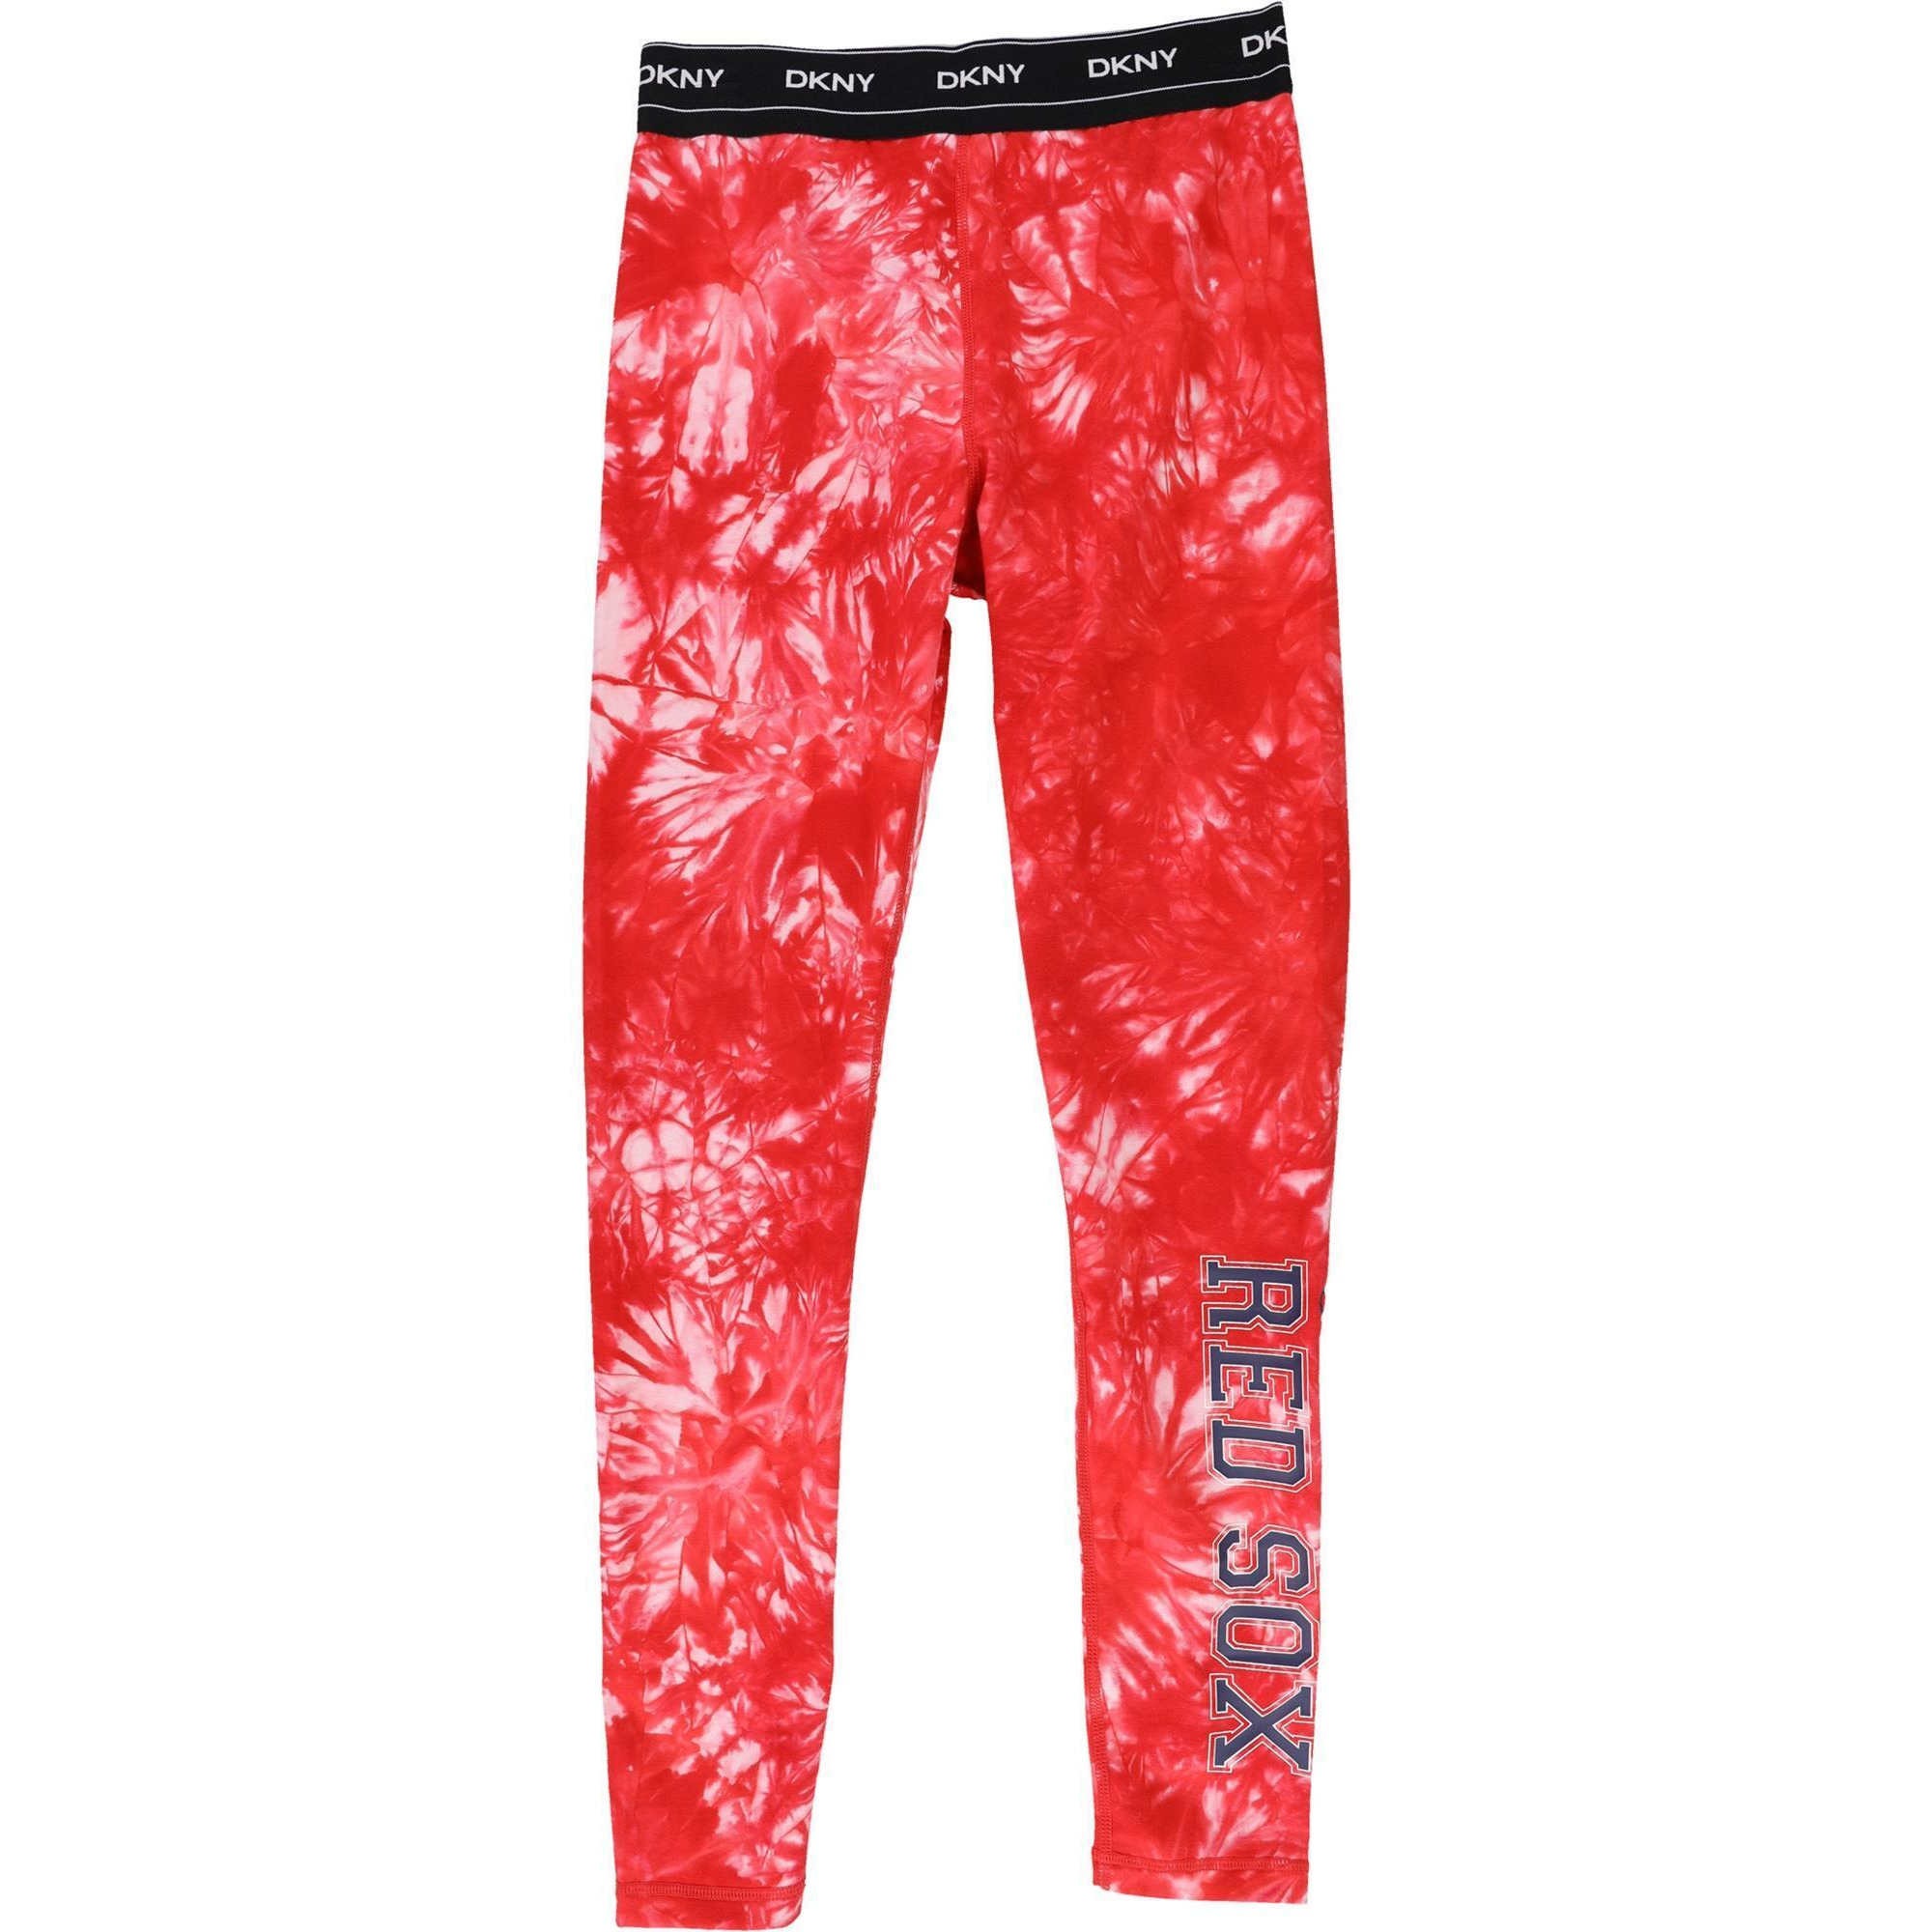 DKNY Womens Boston Red Sox Compression Athletic Pants, Style # DS25R883